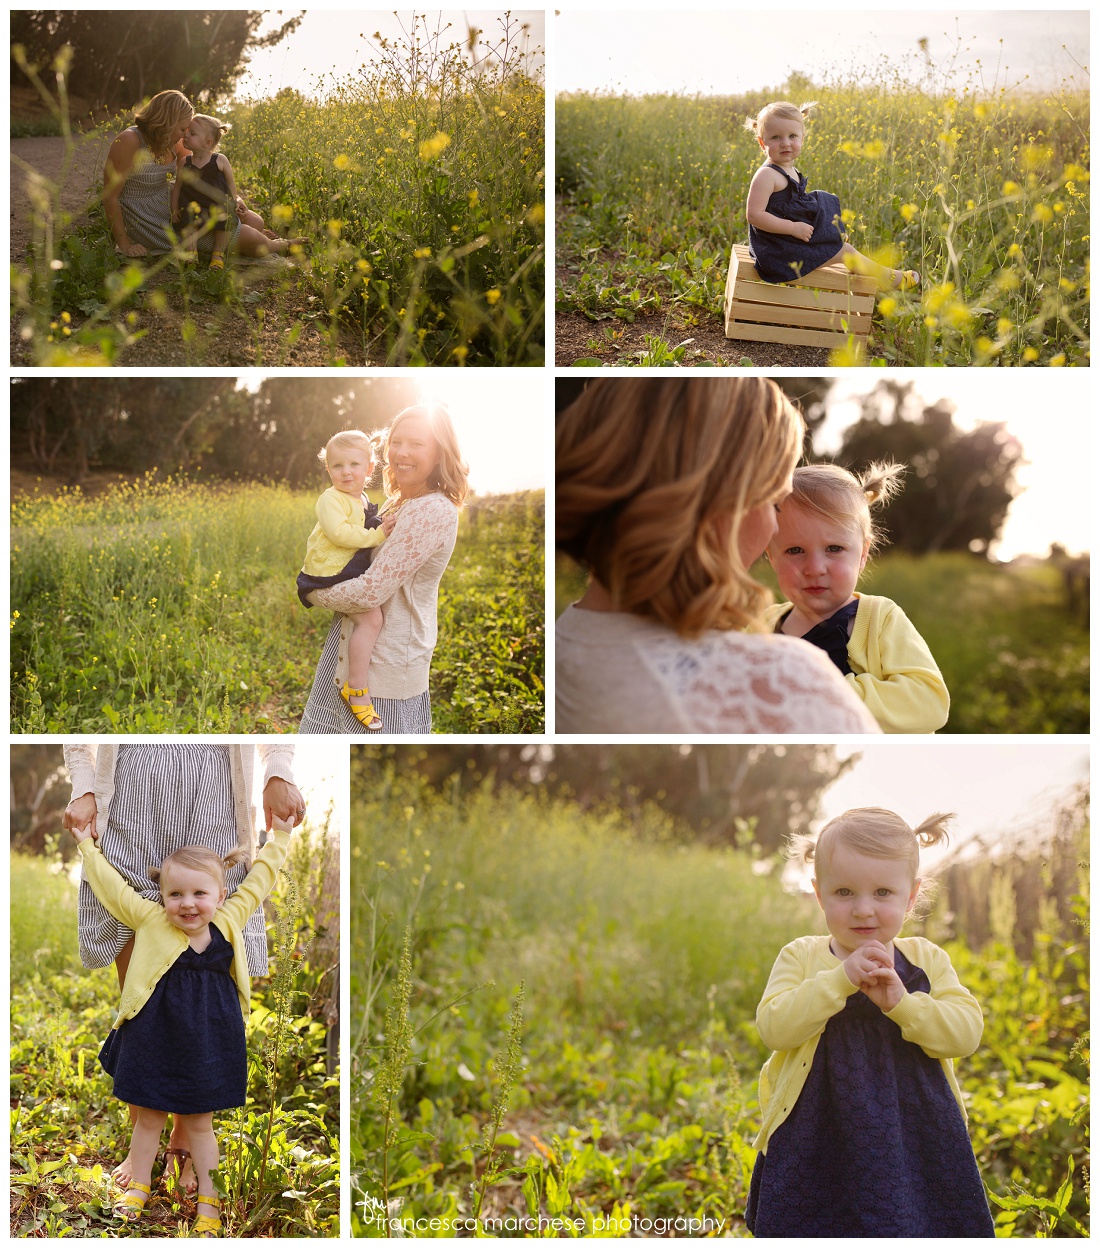 Mommy and me - Francesca Marchese Photography